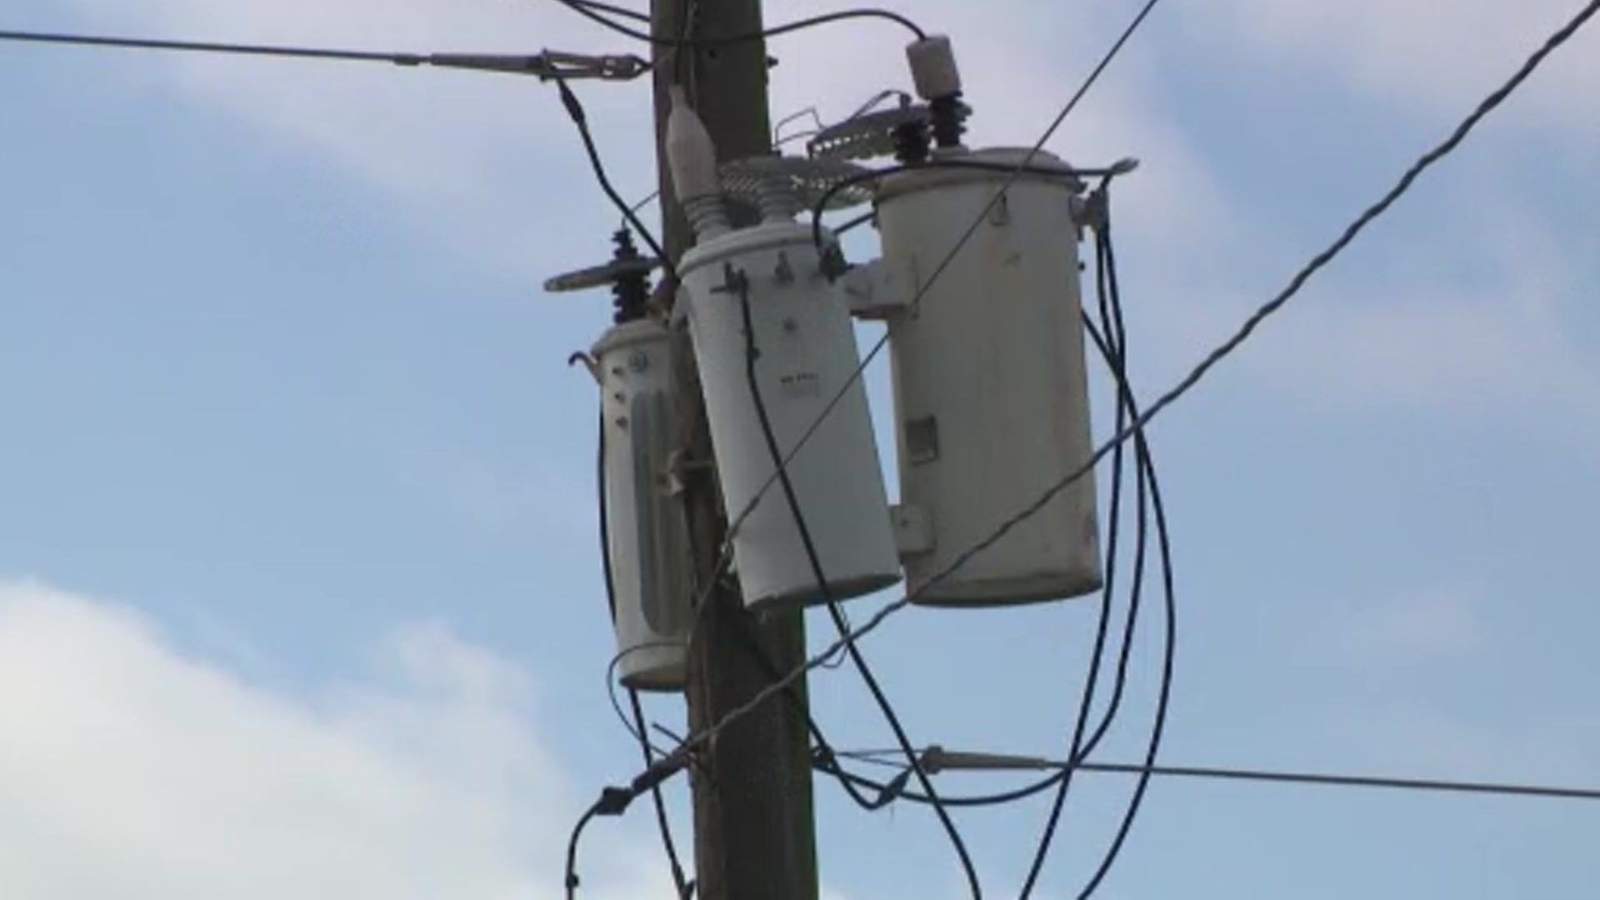 ERCOT says limited outages still possible overnight due to snow, frigid temperatures